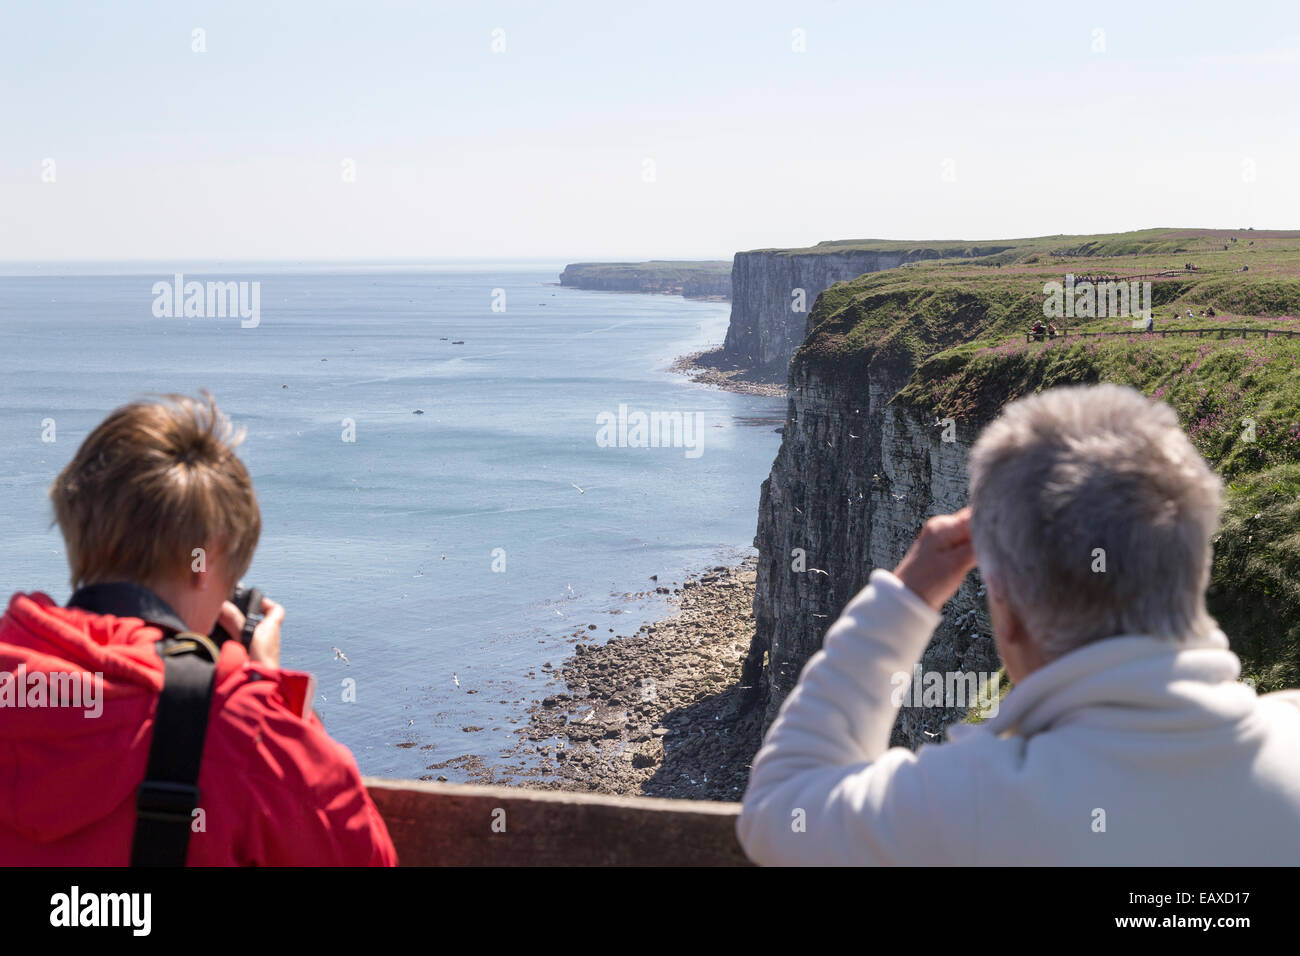 UK, Yorkshire, Bempton Cliffs, two people bird watching and photographing birds at the RSPB site. Stock Photo